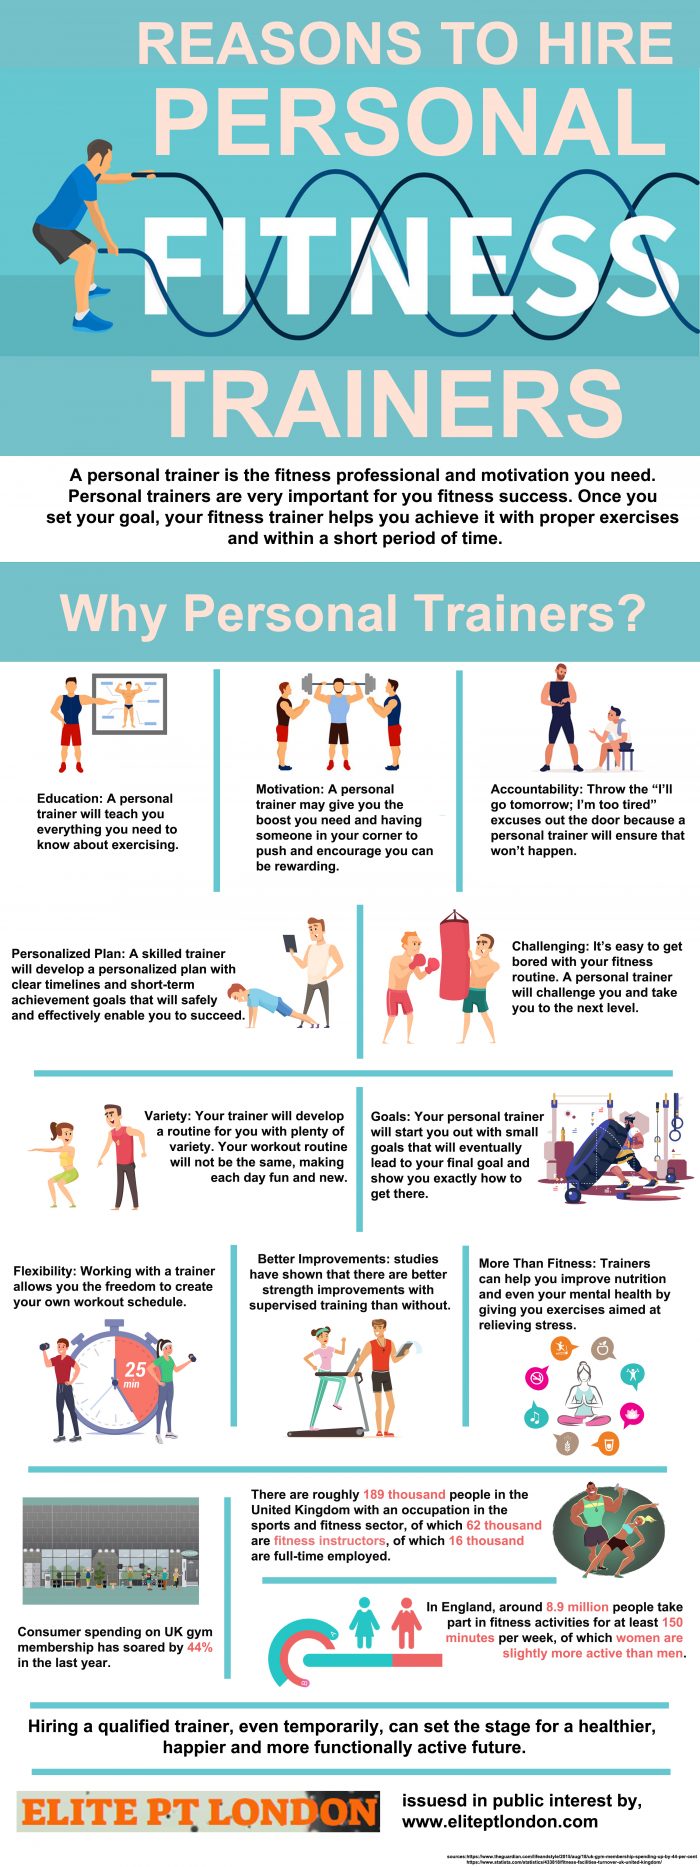 Personal Fitness Trainers